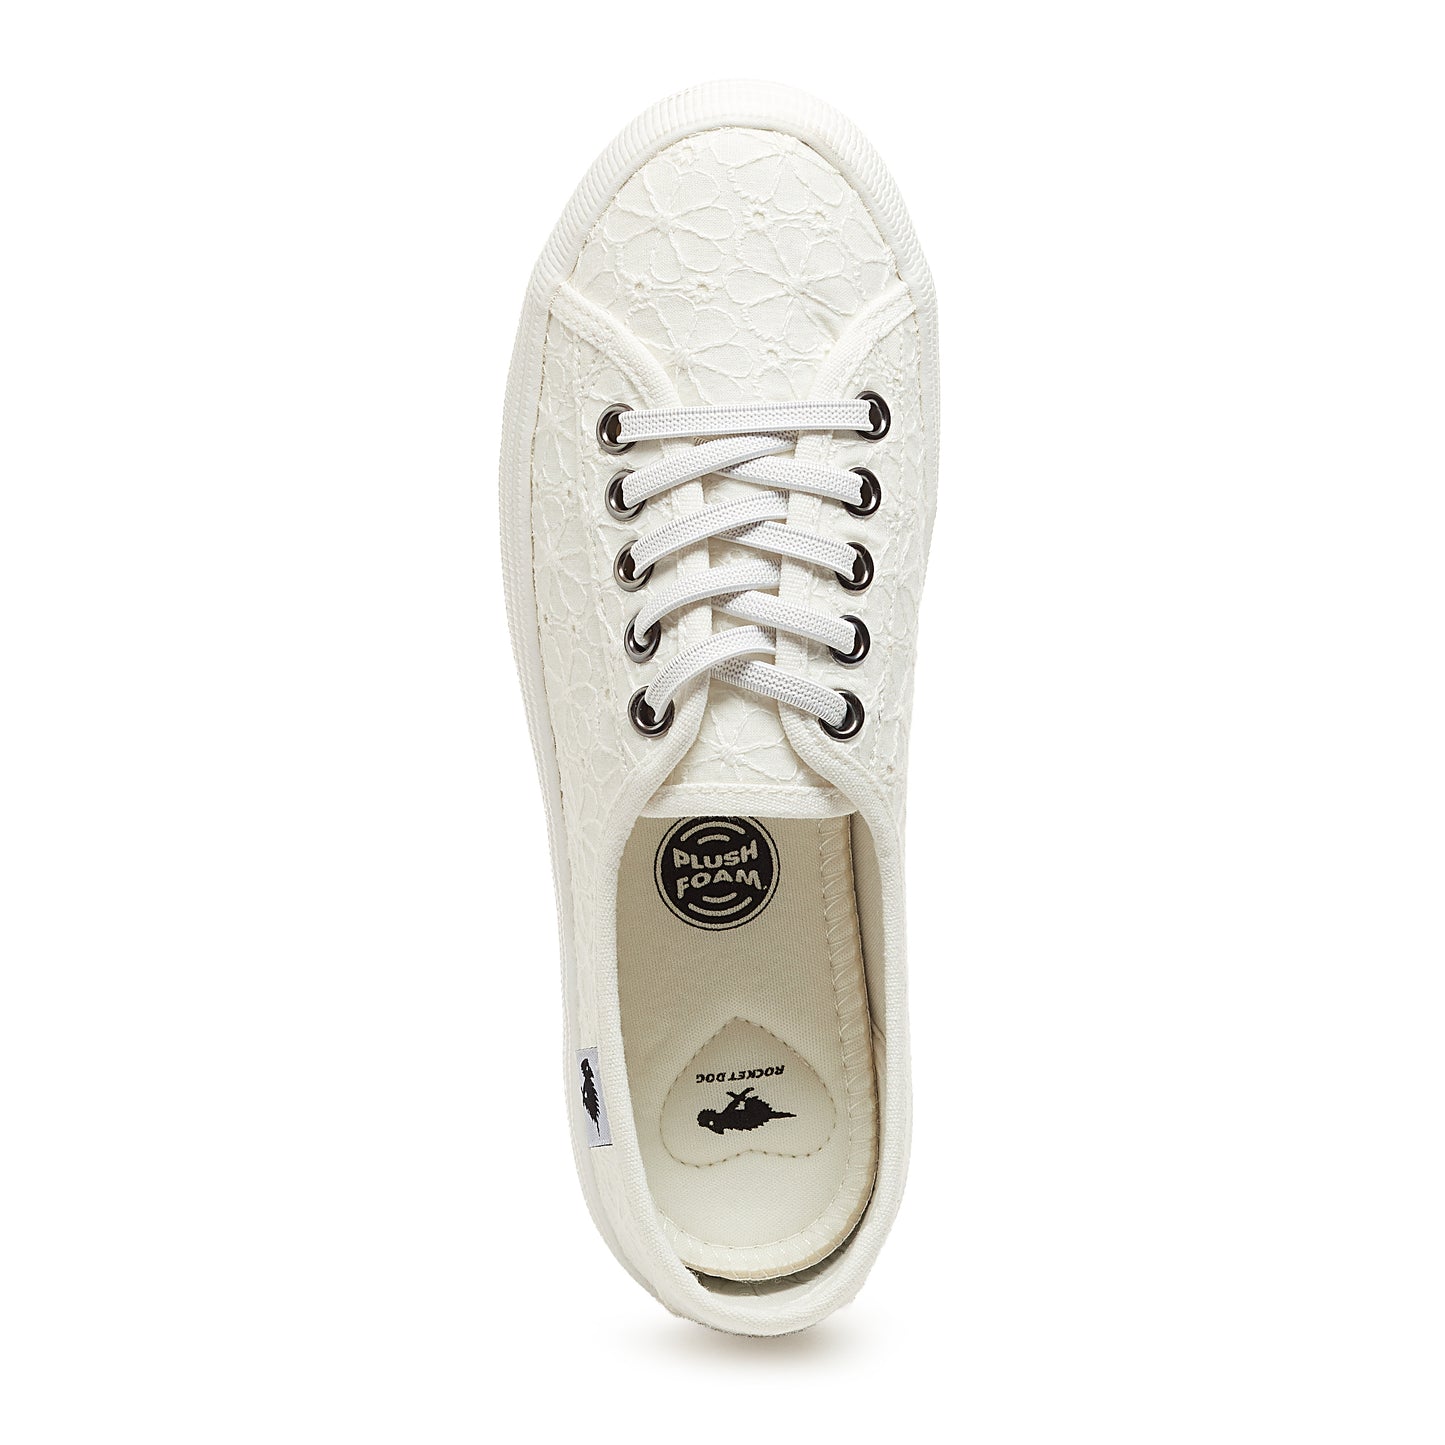 Chow Chow White Elsie Eyelet Trainers | Rocket Dog